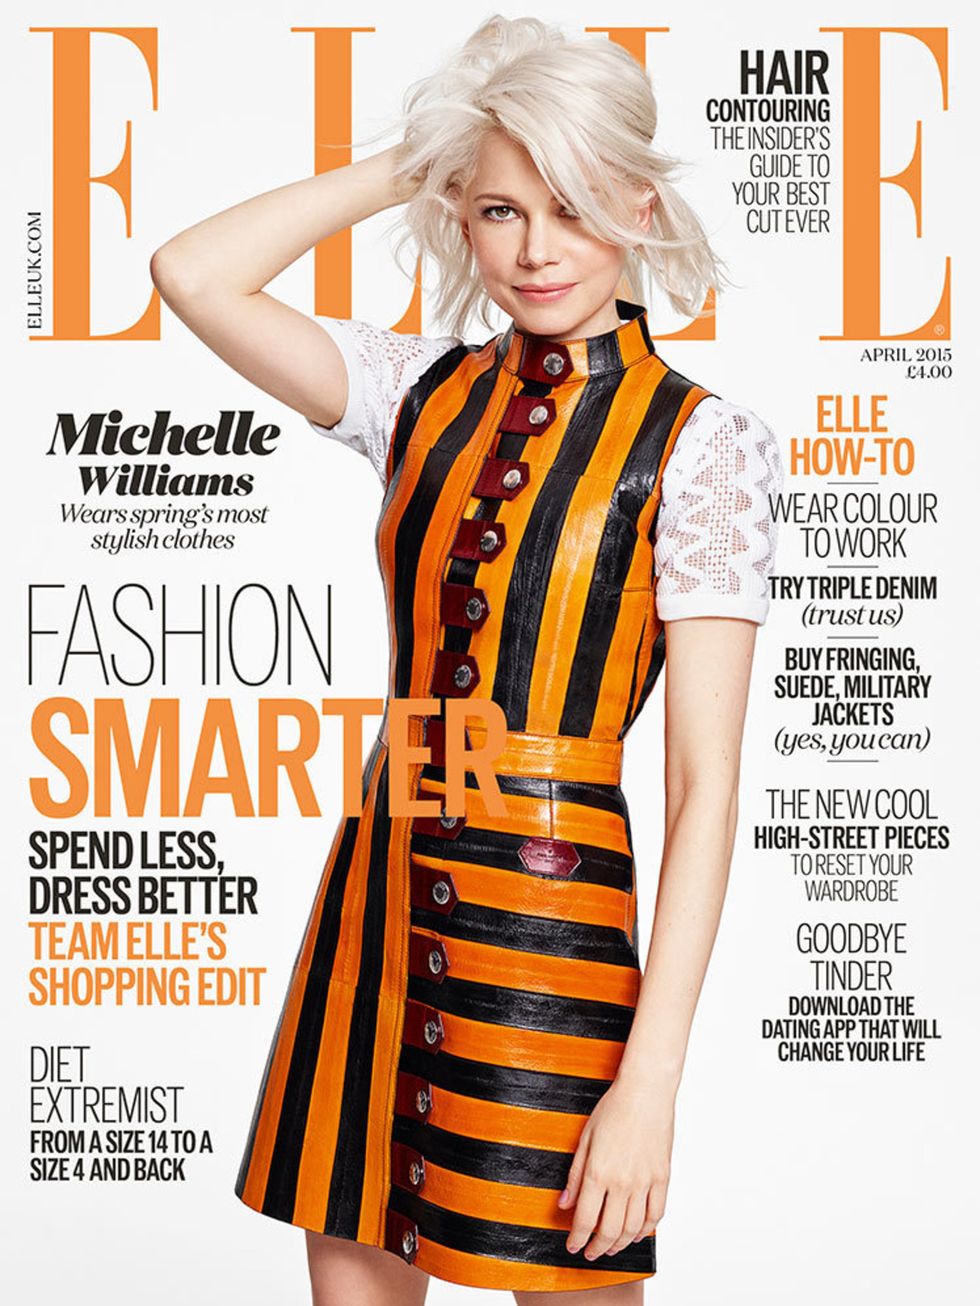 The skincare and make-up essentials you need to recreate Michelle Williams' April cover look.